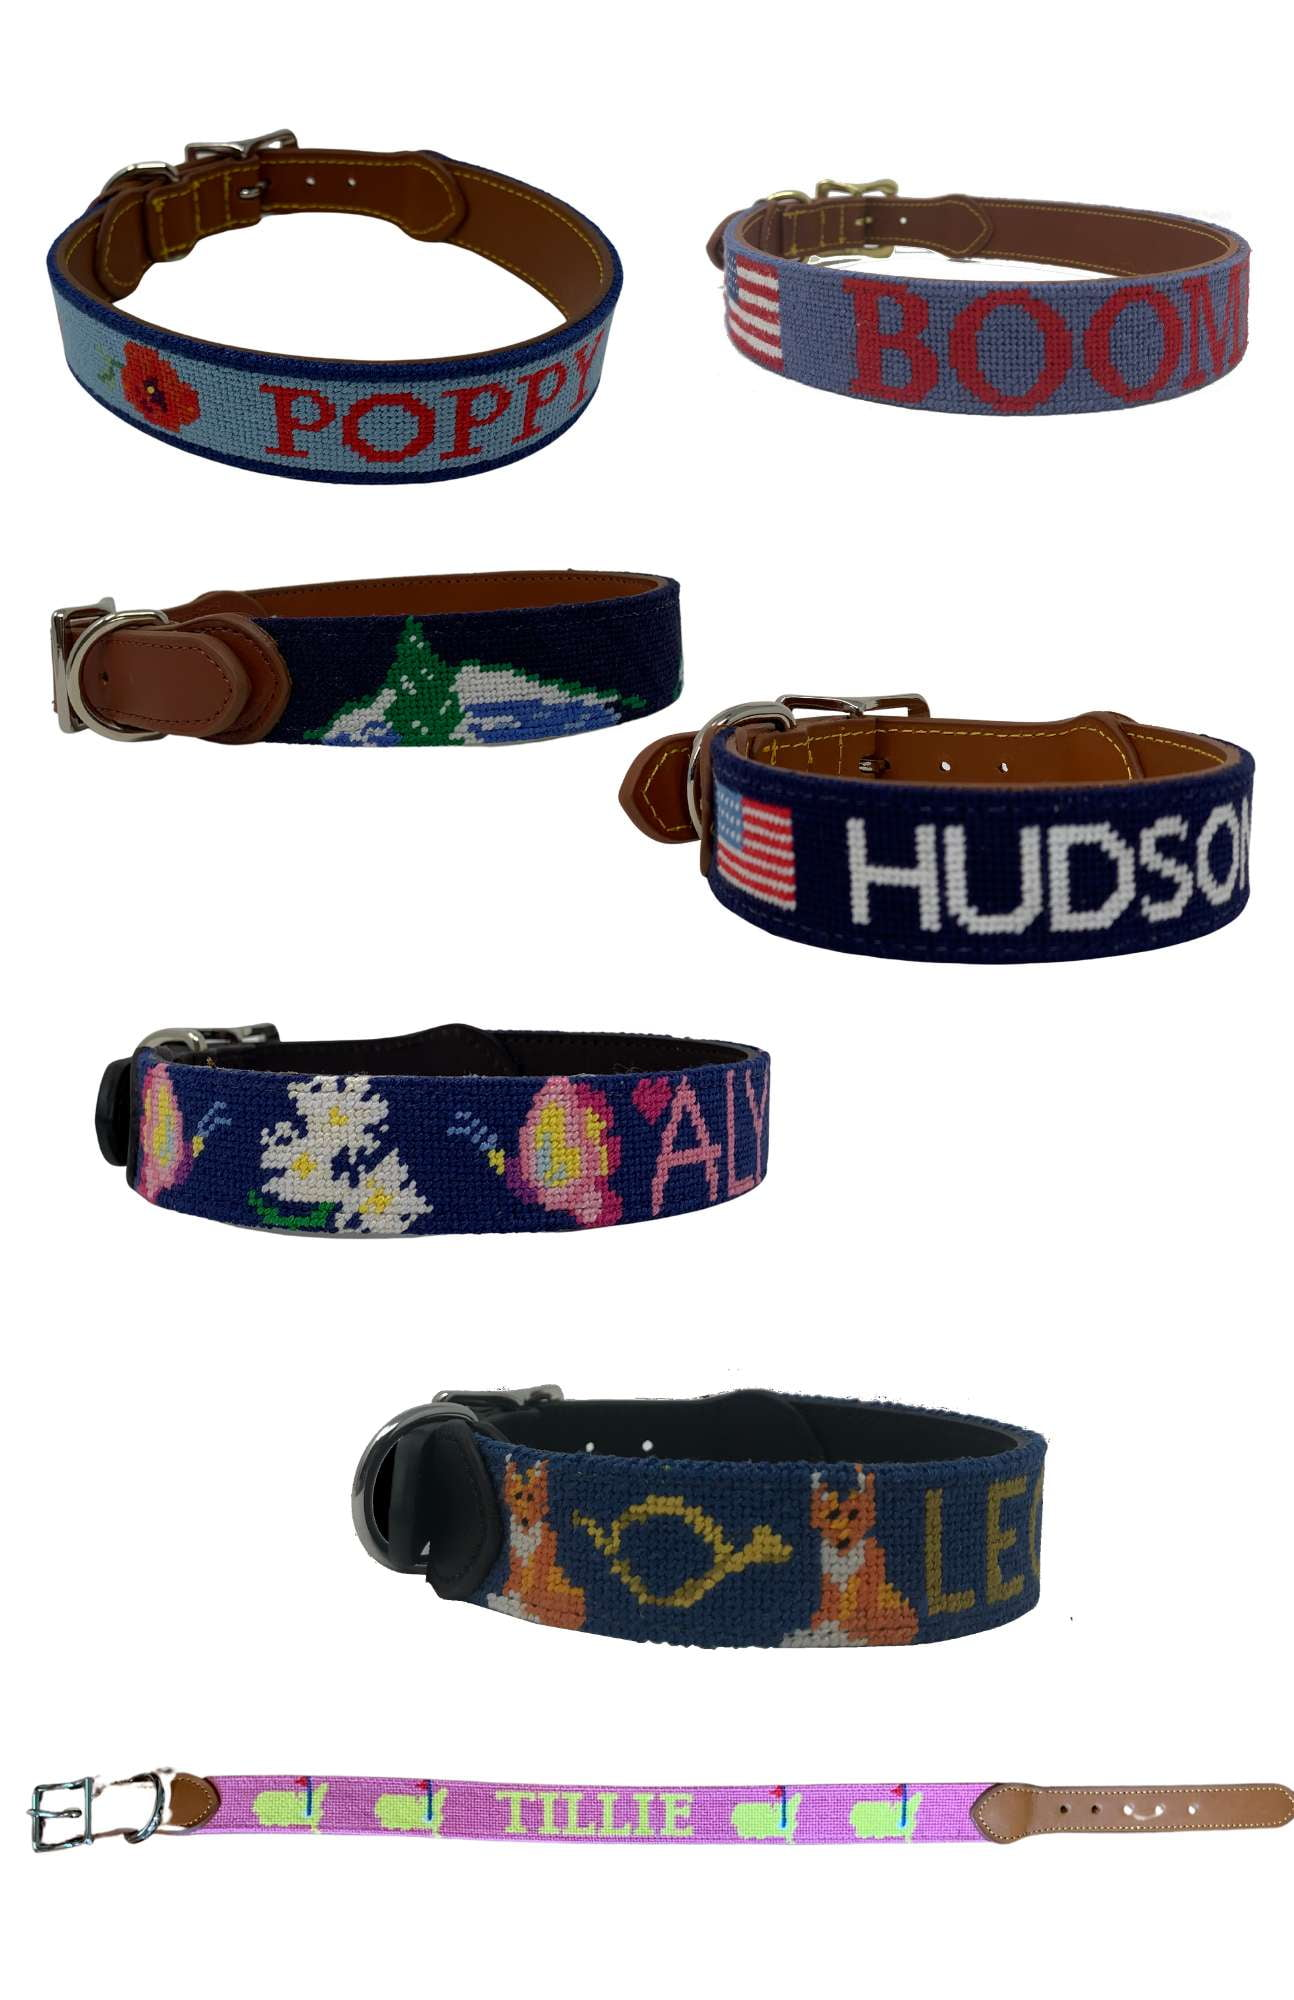 Needlepoint Dog Collar-Personalized custom collars to match your pup's personality